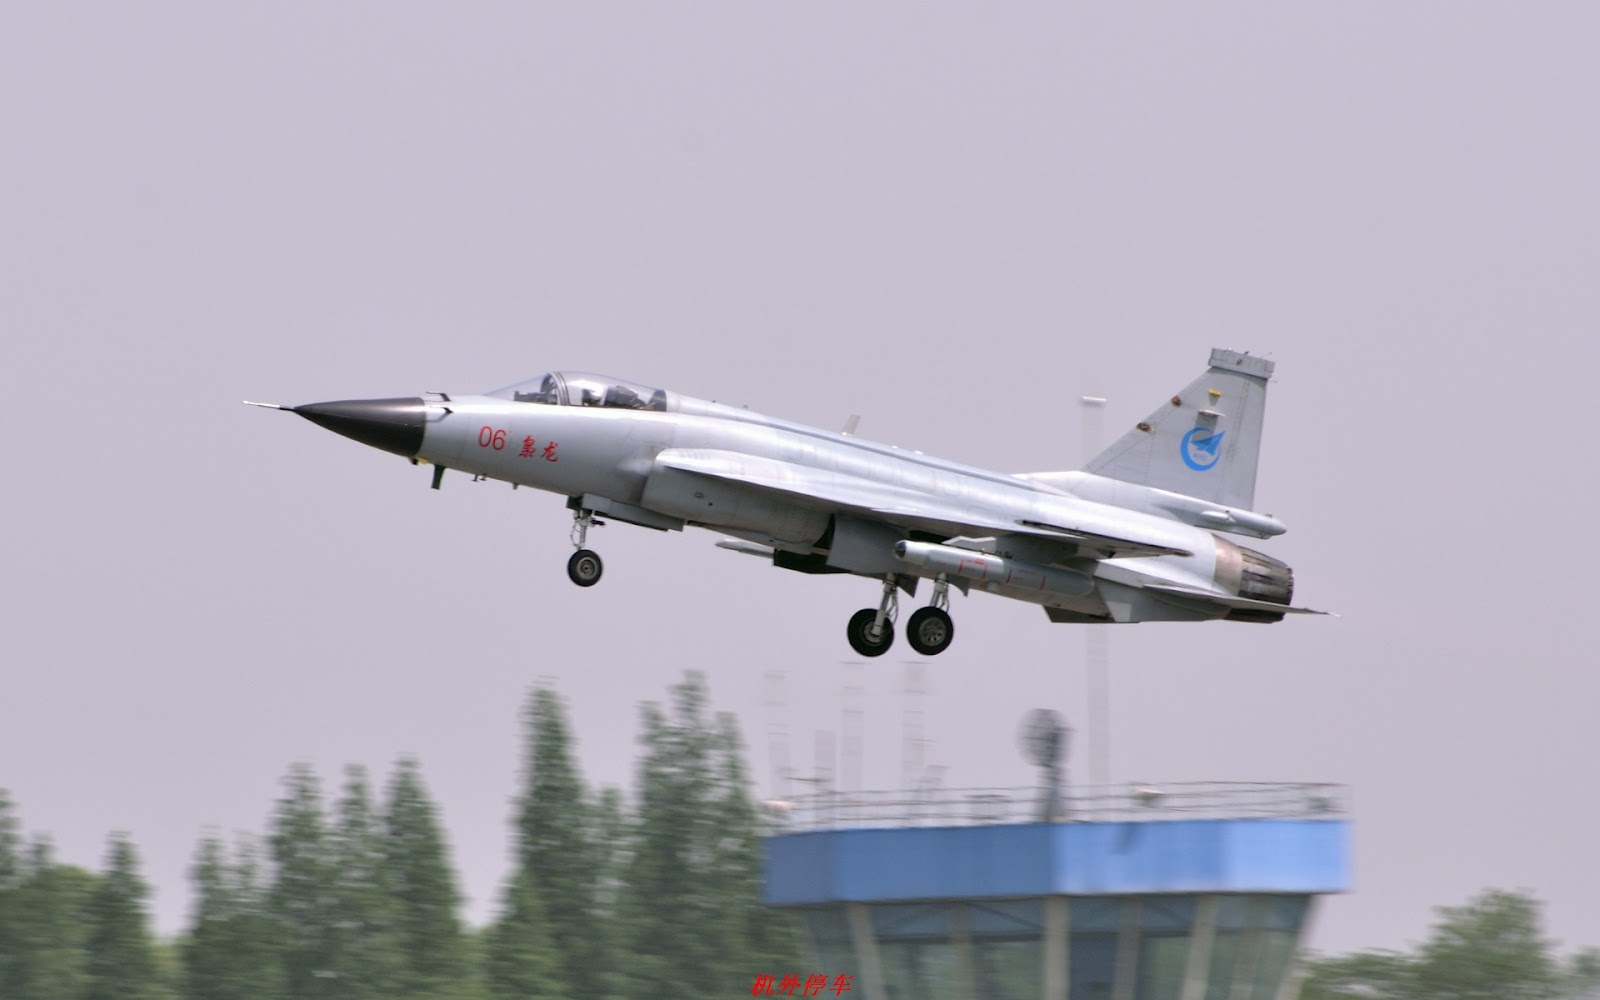 FC-1+JF-17+Thunder+Xiaolong+Fighter+electro+optical+targeting+system+eots+pod+for+fighter+jets+WMD-7+laser-designator+targeting+pod+block+I+II+III+IV+1+2+3+4+PAF+PLAAF+Pakistan+air+force+chinese+china++%282%29.jpg